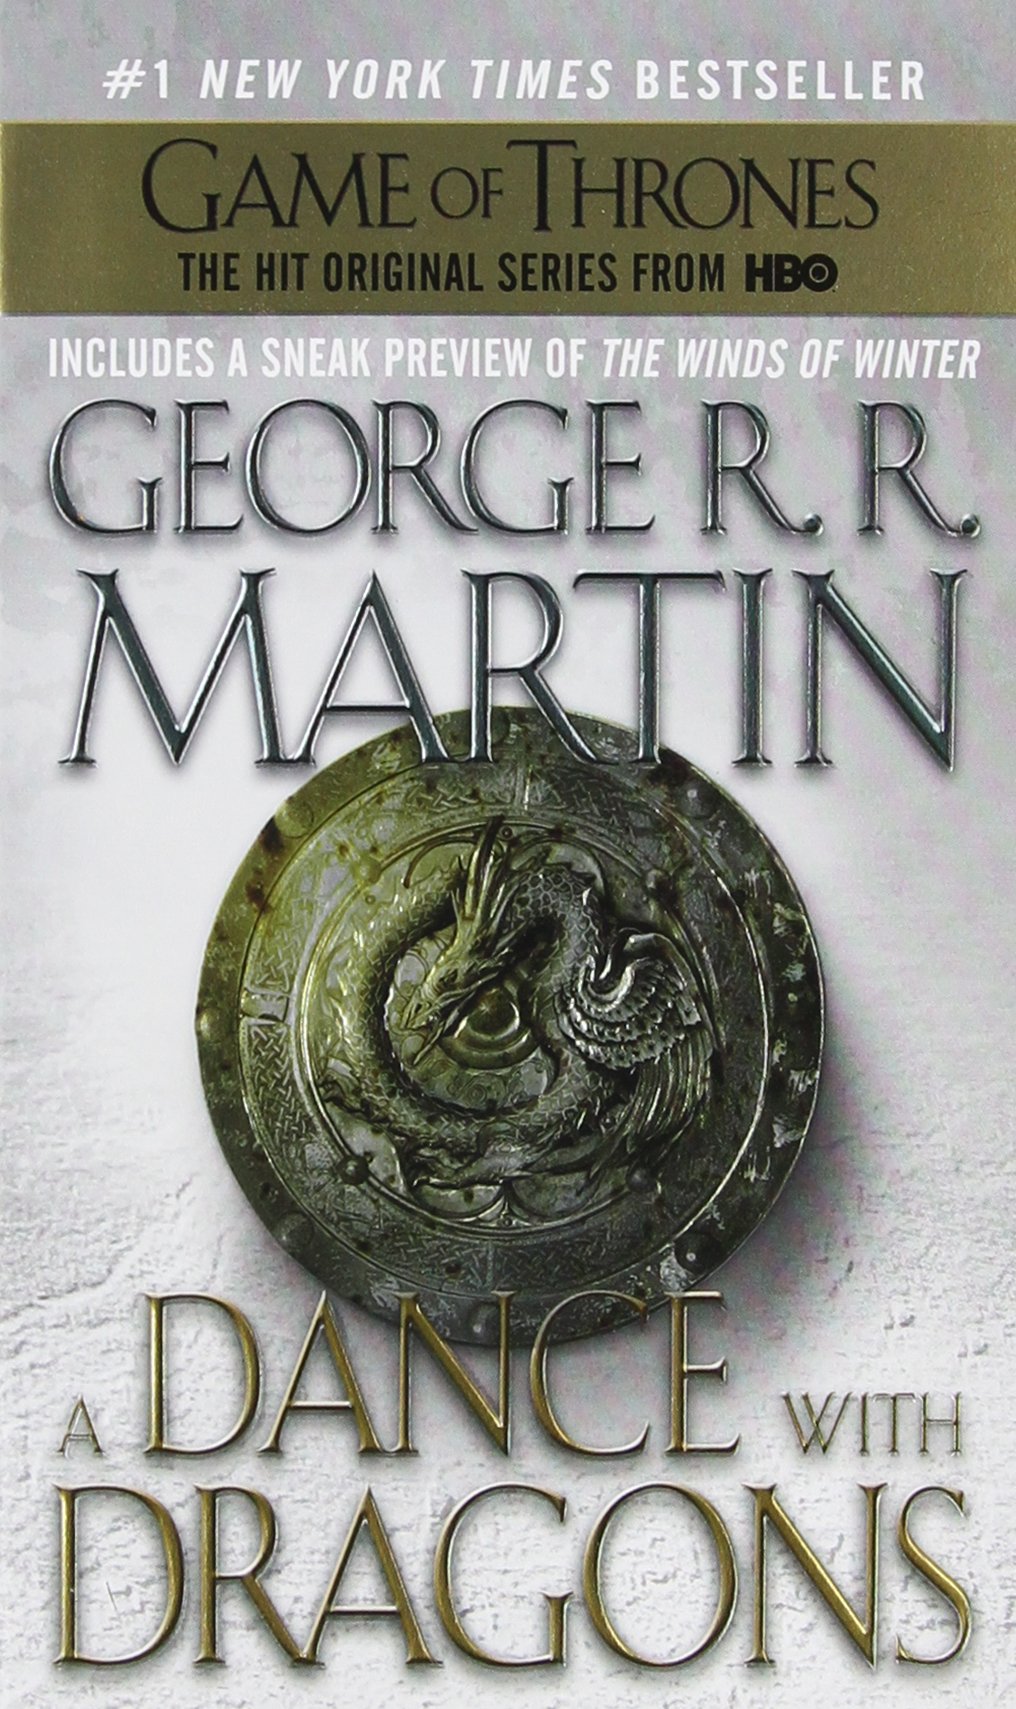 George R. R. Martin's A Game of Thrones 5-Book Boxed Set (Song of Ice and  Fire Series) : A Game of Thrones, A Clash of Kings, A Storm of Swords, A  Feast